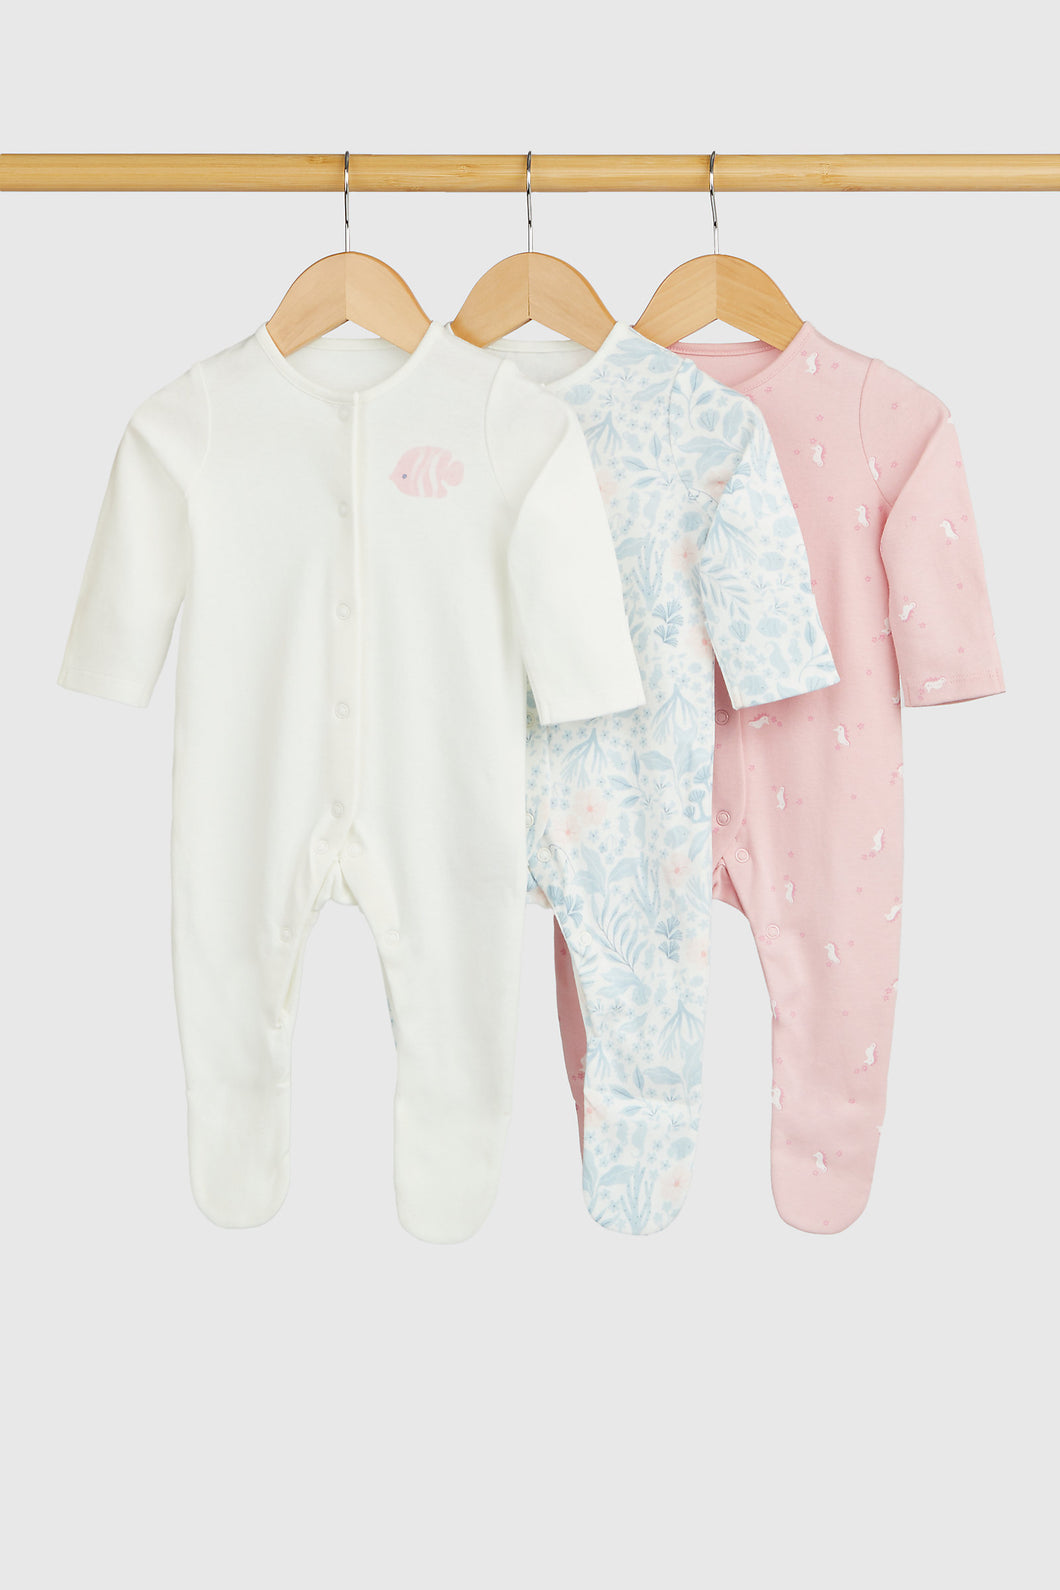 Mothercare Sealife Sleepsuits - 3 Pack